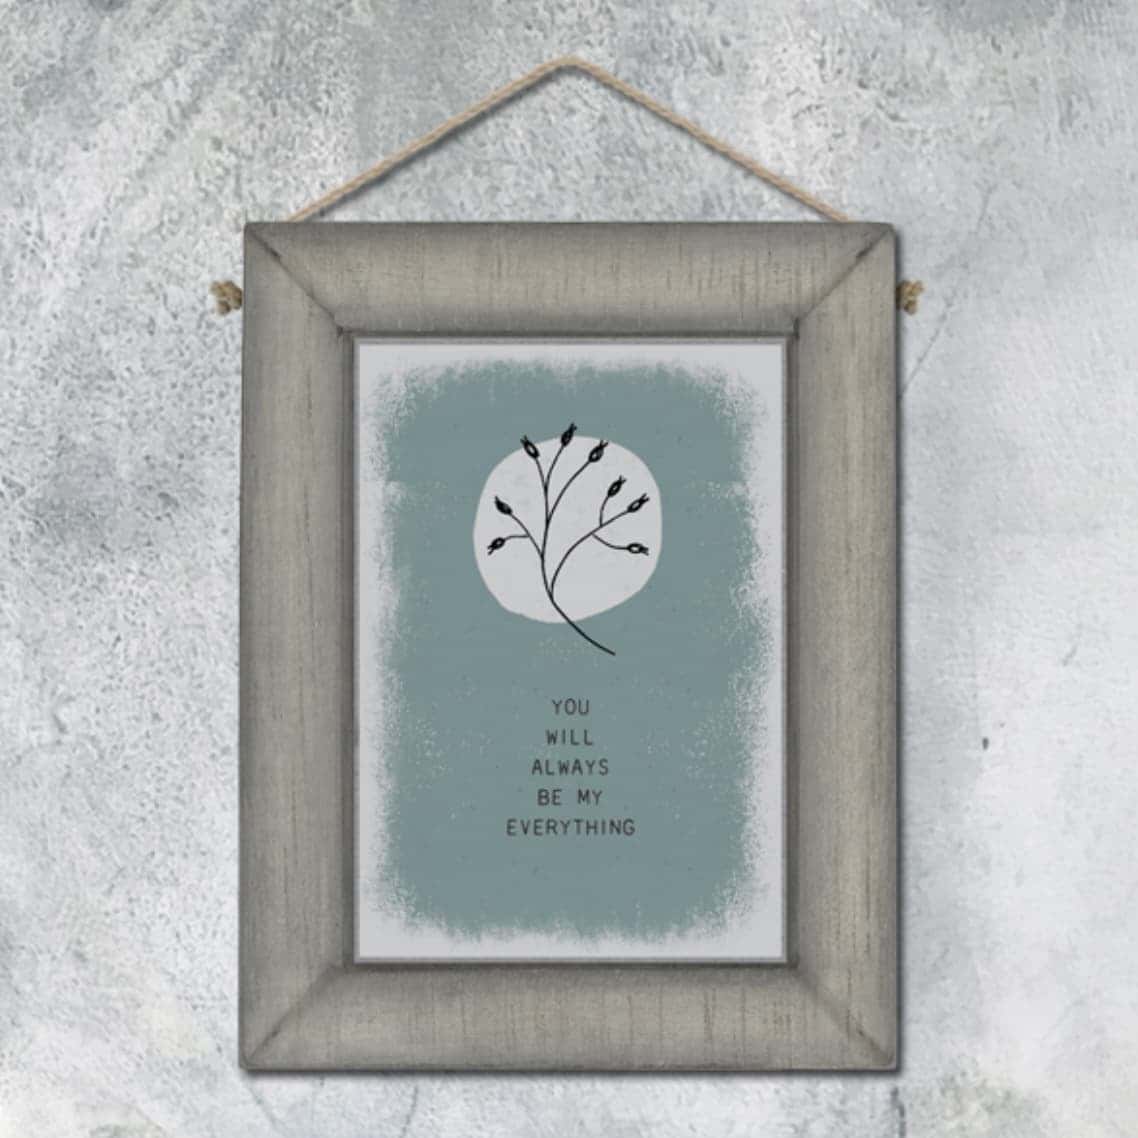 'You will always be my everything' Wooden Hedgerow Picture by East of India